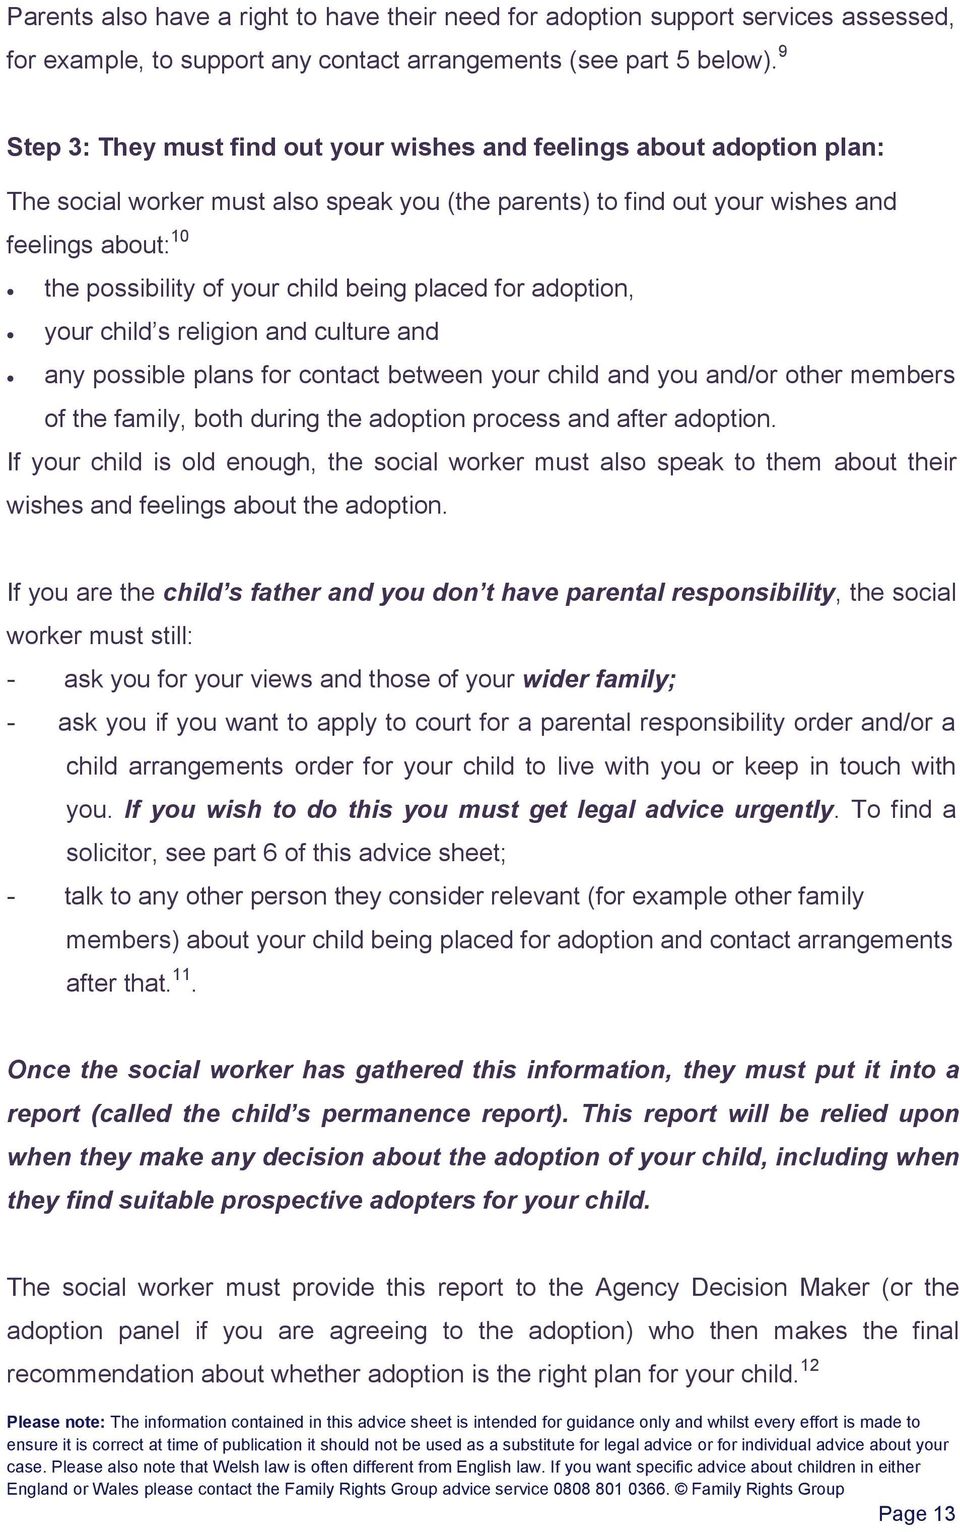 child being placed for adoption, your child s religion and culture and any possible plans for contact between your child and you and/or other members of the family, both during the adoption process